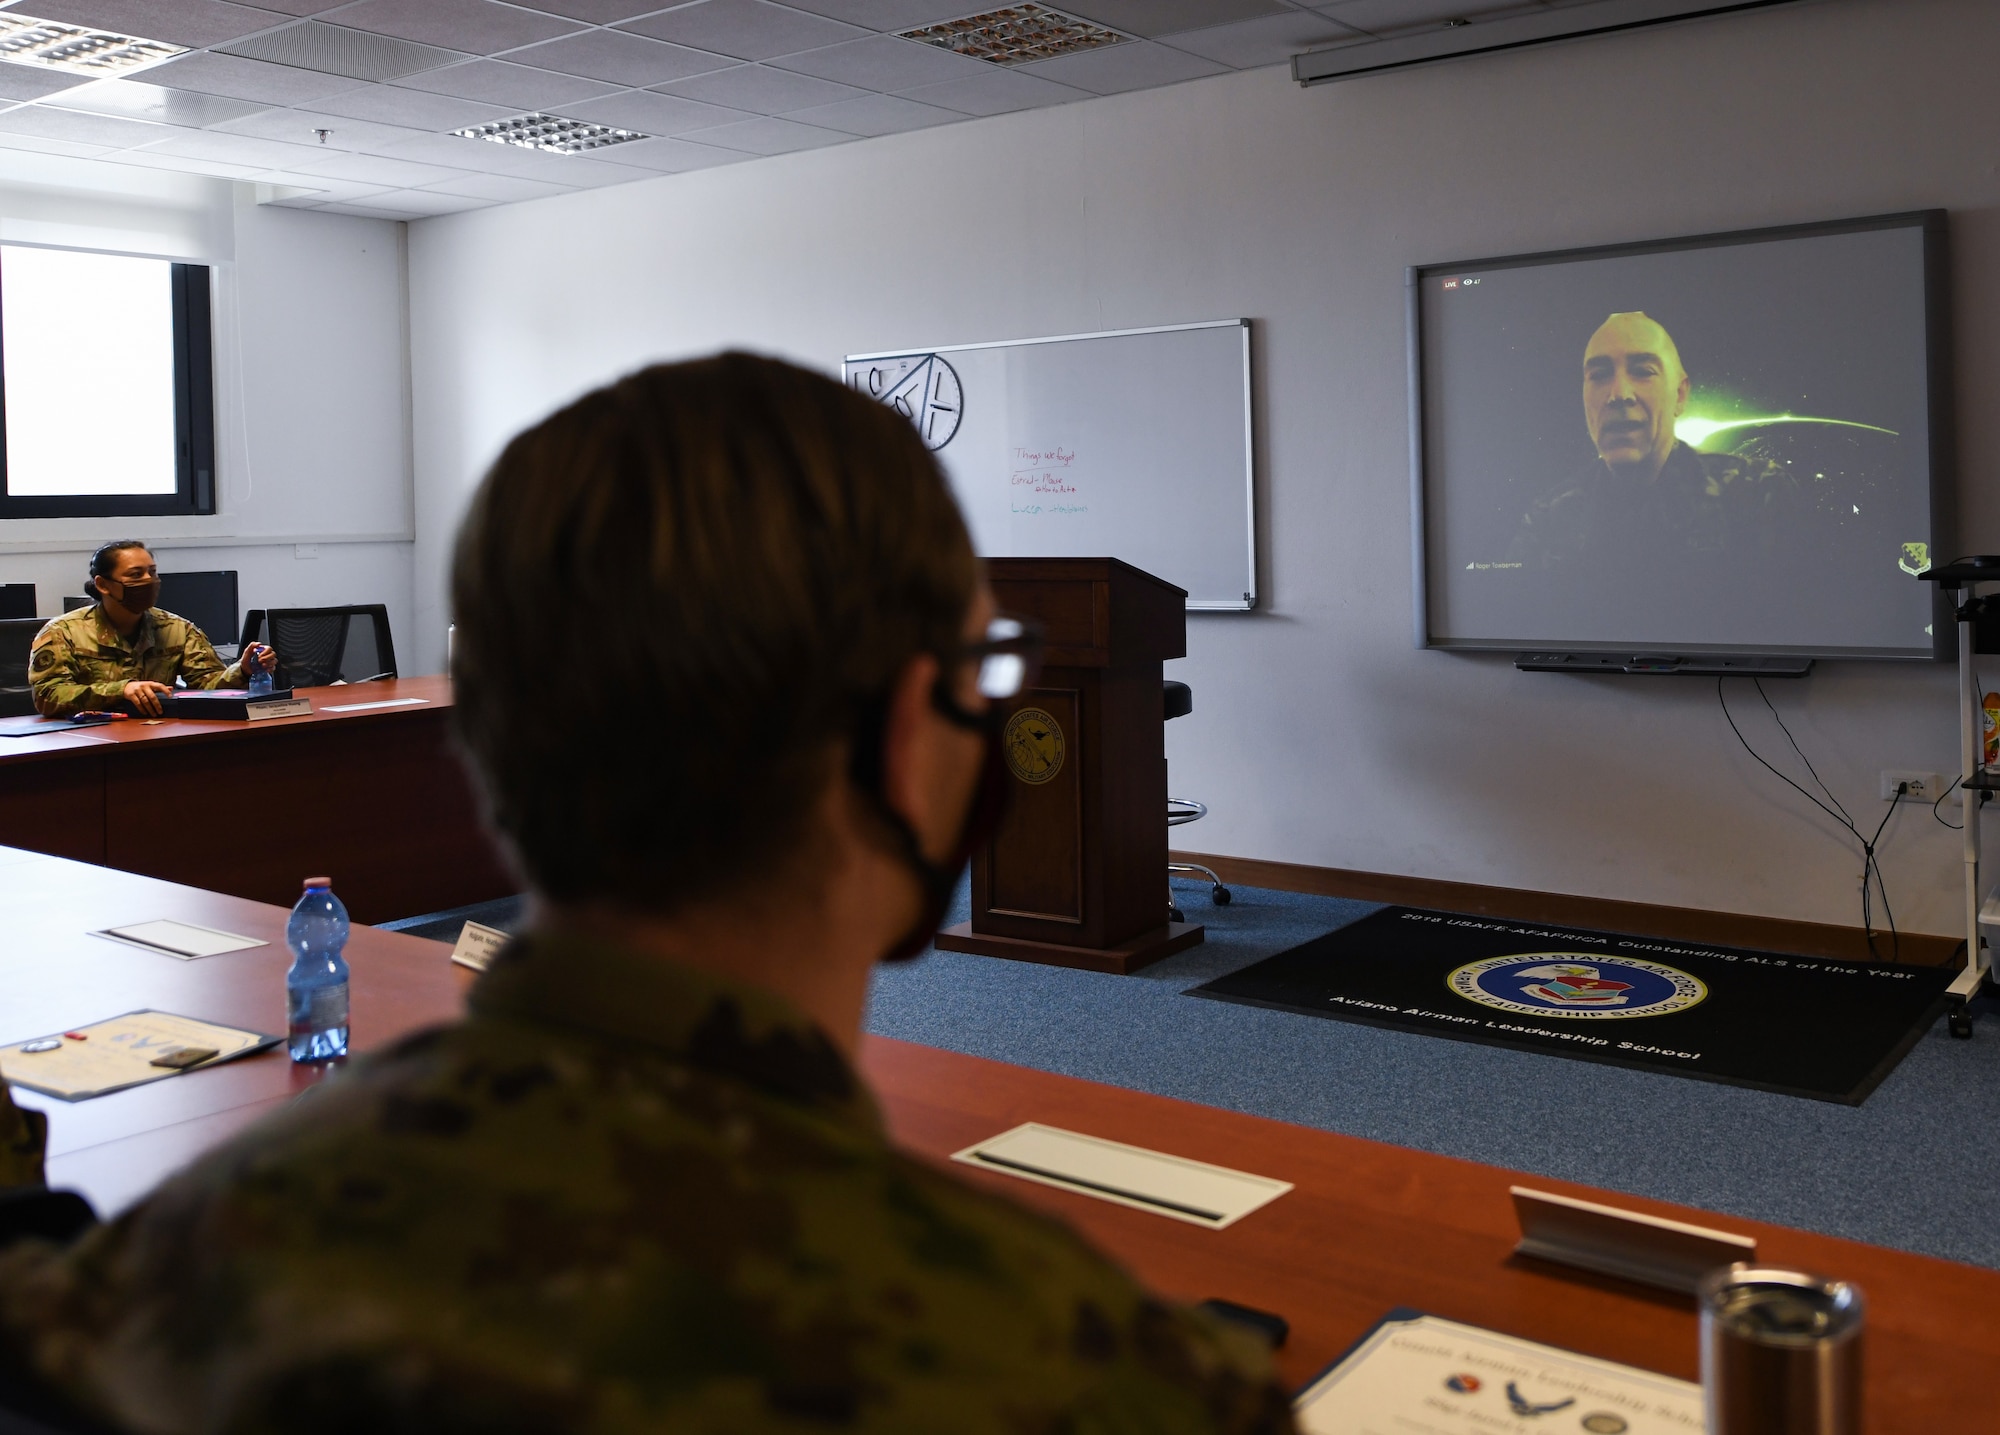 Chief Master Sgt. Roger A. Towberman, Senior Enlisted Advisor of the U.S. Space Force talks to Airmen during a virtual Airman Leadership School graduation at Aviano Air Base, Italy, May 15, 2020. USSPACECOM is responsible for deterring conflict, defending U.S. and Allied freedom of action in space, delivering combat-relevant space capability to the joint/combined force, and developing joint warfighters to advance U.S. and Allied interests in, through and from the space domain. (U.S. Air Force photo by Airman 1st Class Ericka A. Woolever)